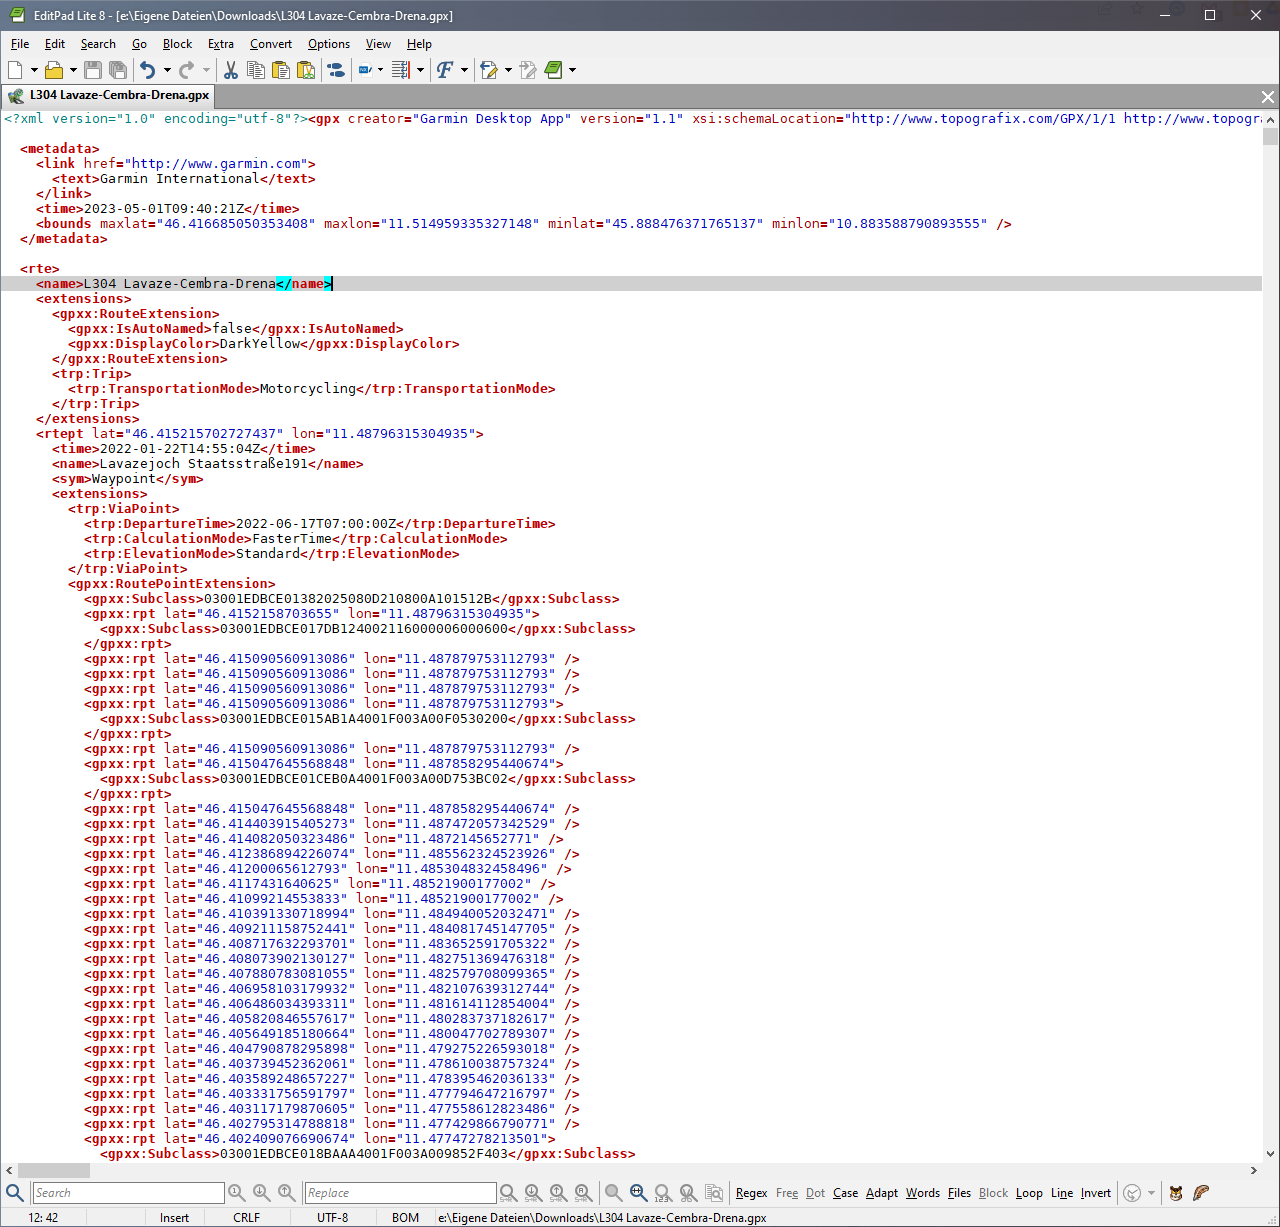 The XML code of the exported GPX file